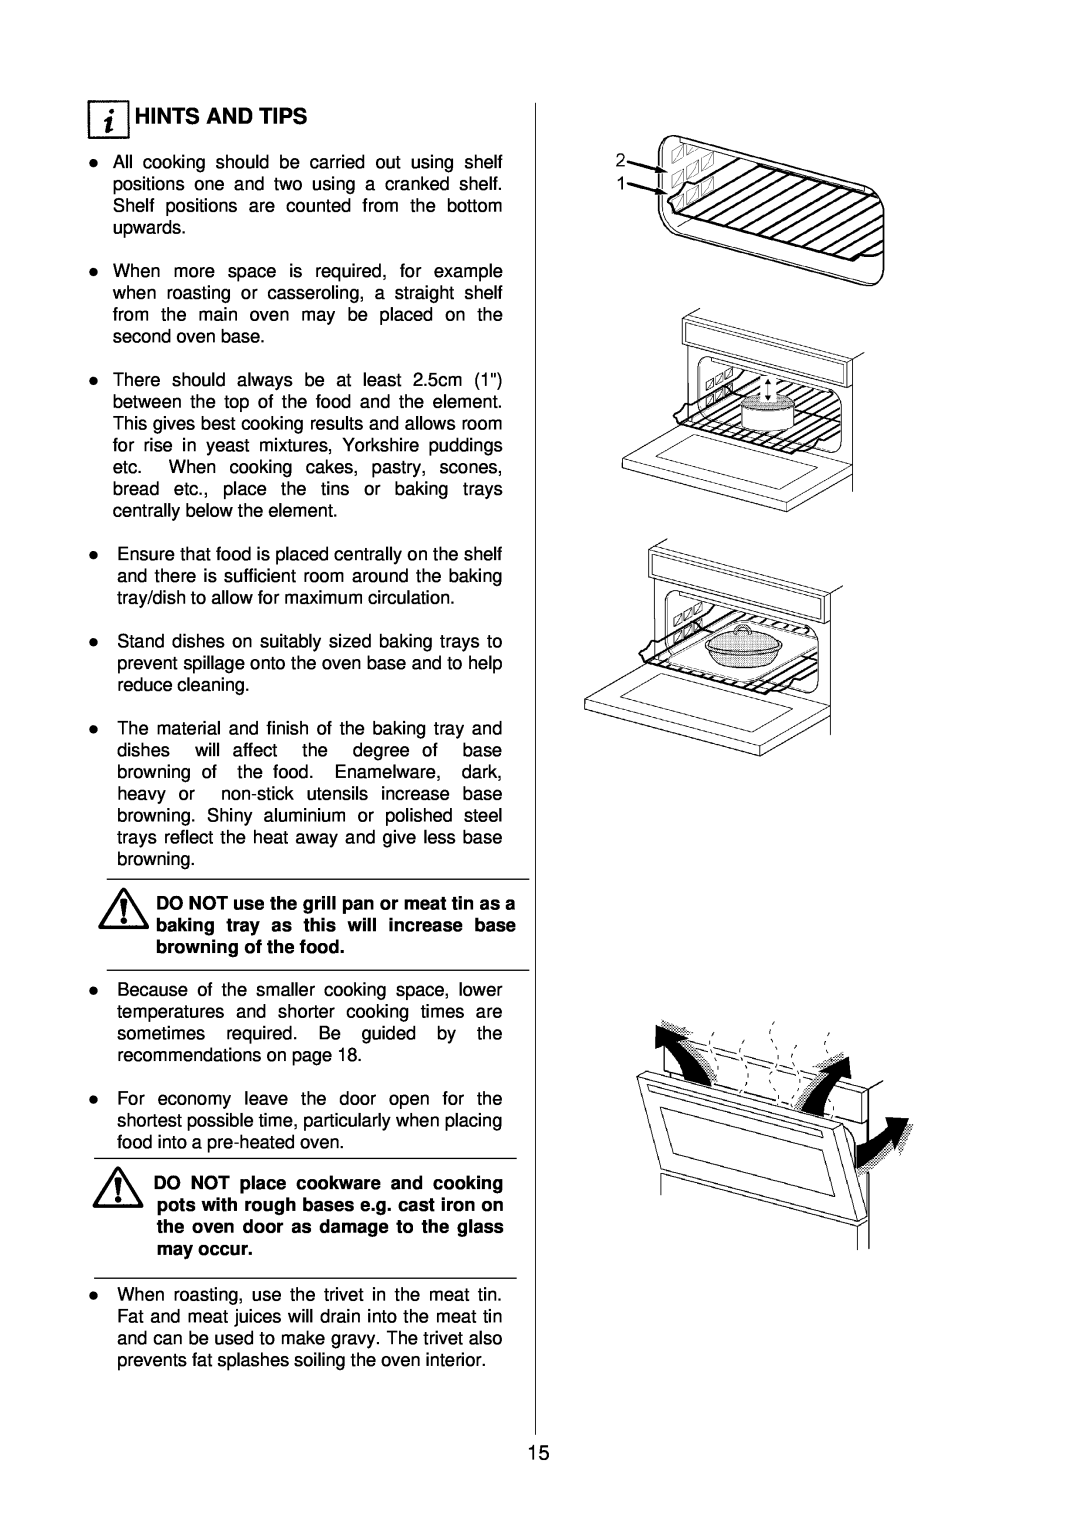 Electrolux D2160 installation instructions Hints And Tips 